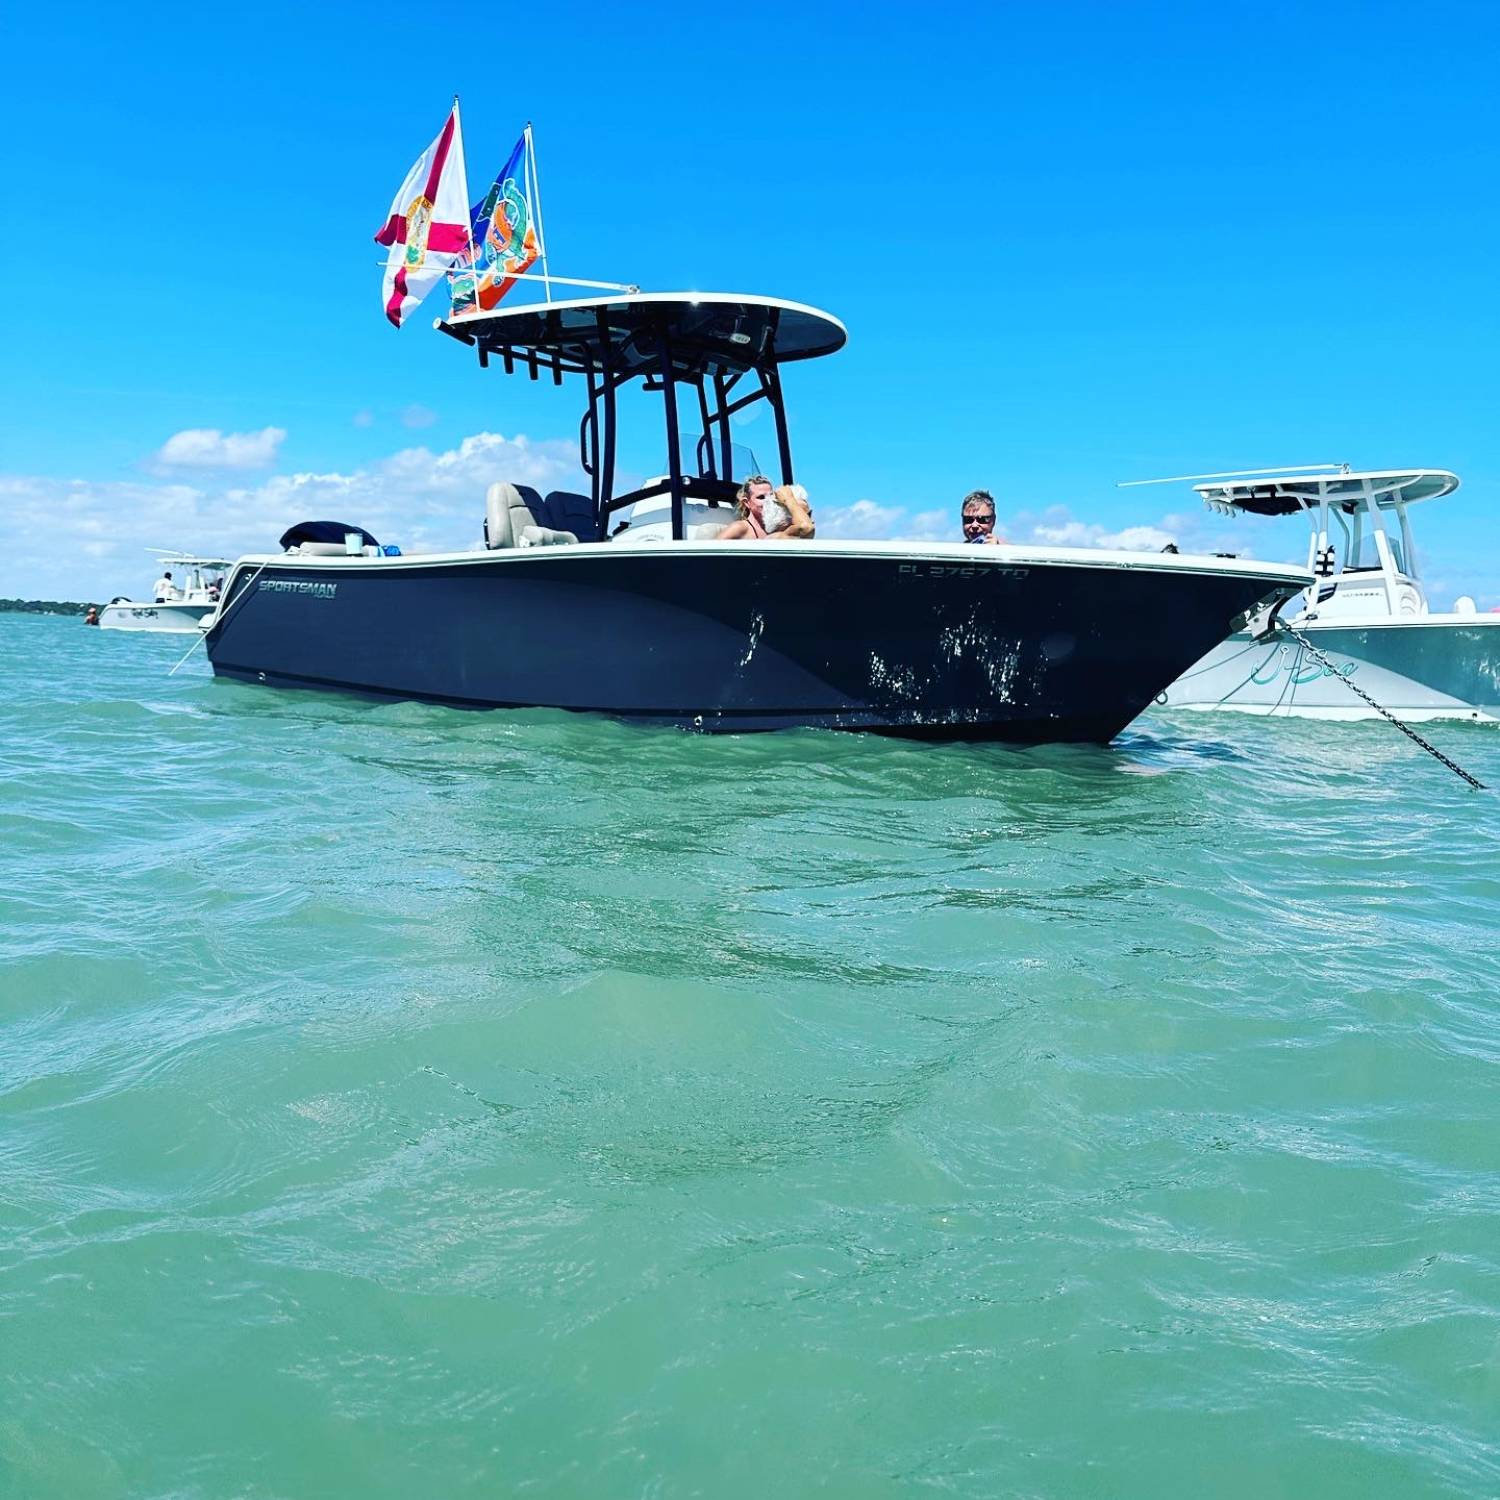 Title: Love my 231 - On board their Sportsman Heritage 231 Center Console - Location: Sebastian Inlet. Participating in the Photo Contest #SportsmanOctober2023